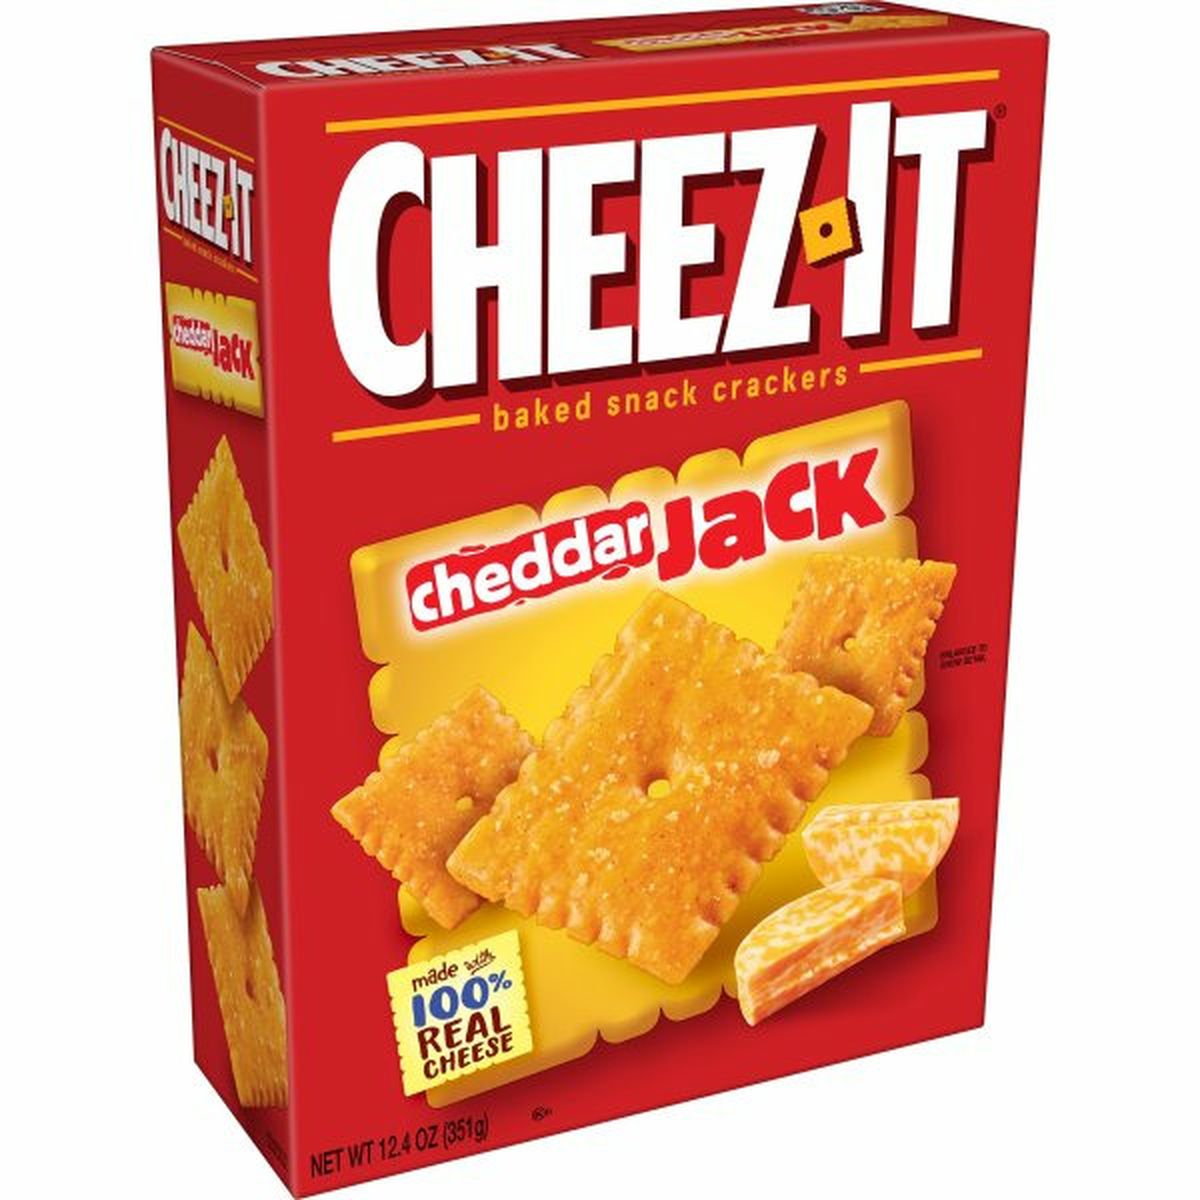 Calories in Cheez-It Crackers Cheez-It Baked Snack Cheese Crackers, Cheddar Jack, 12.4oz